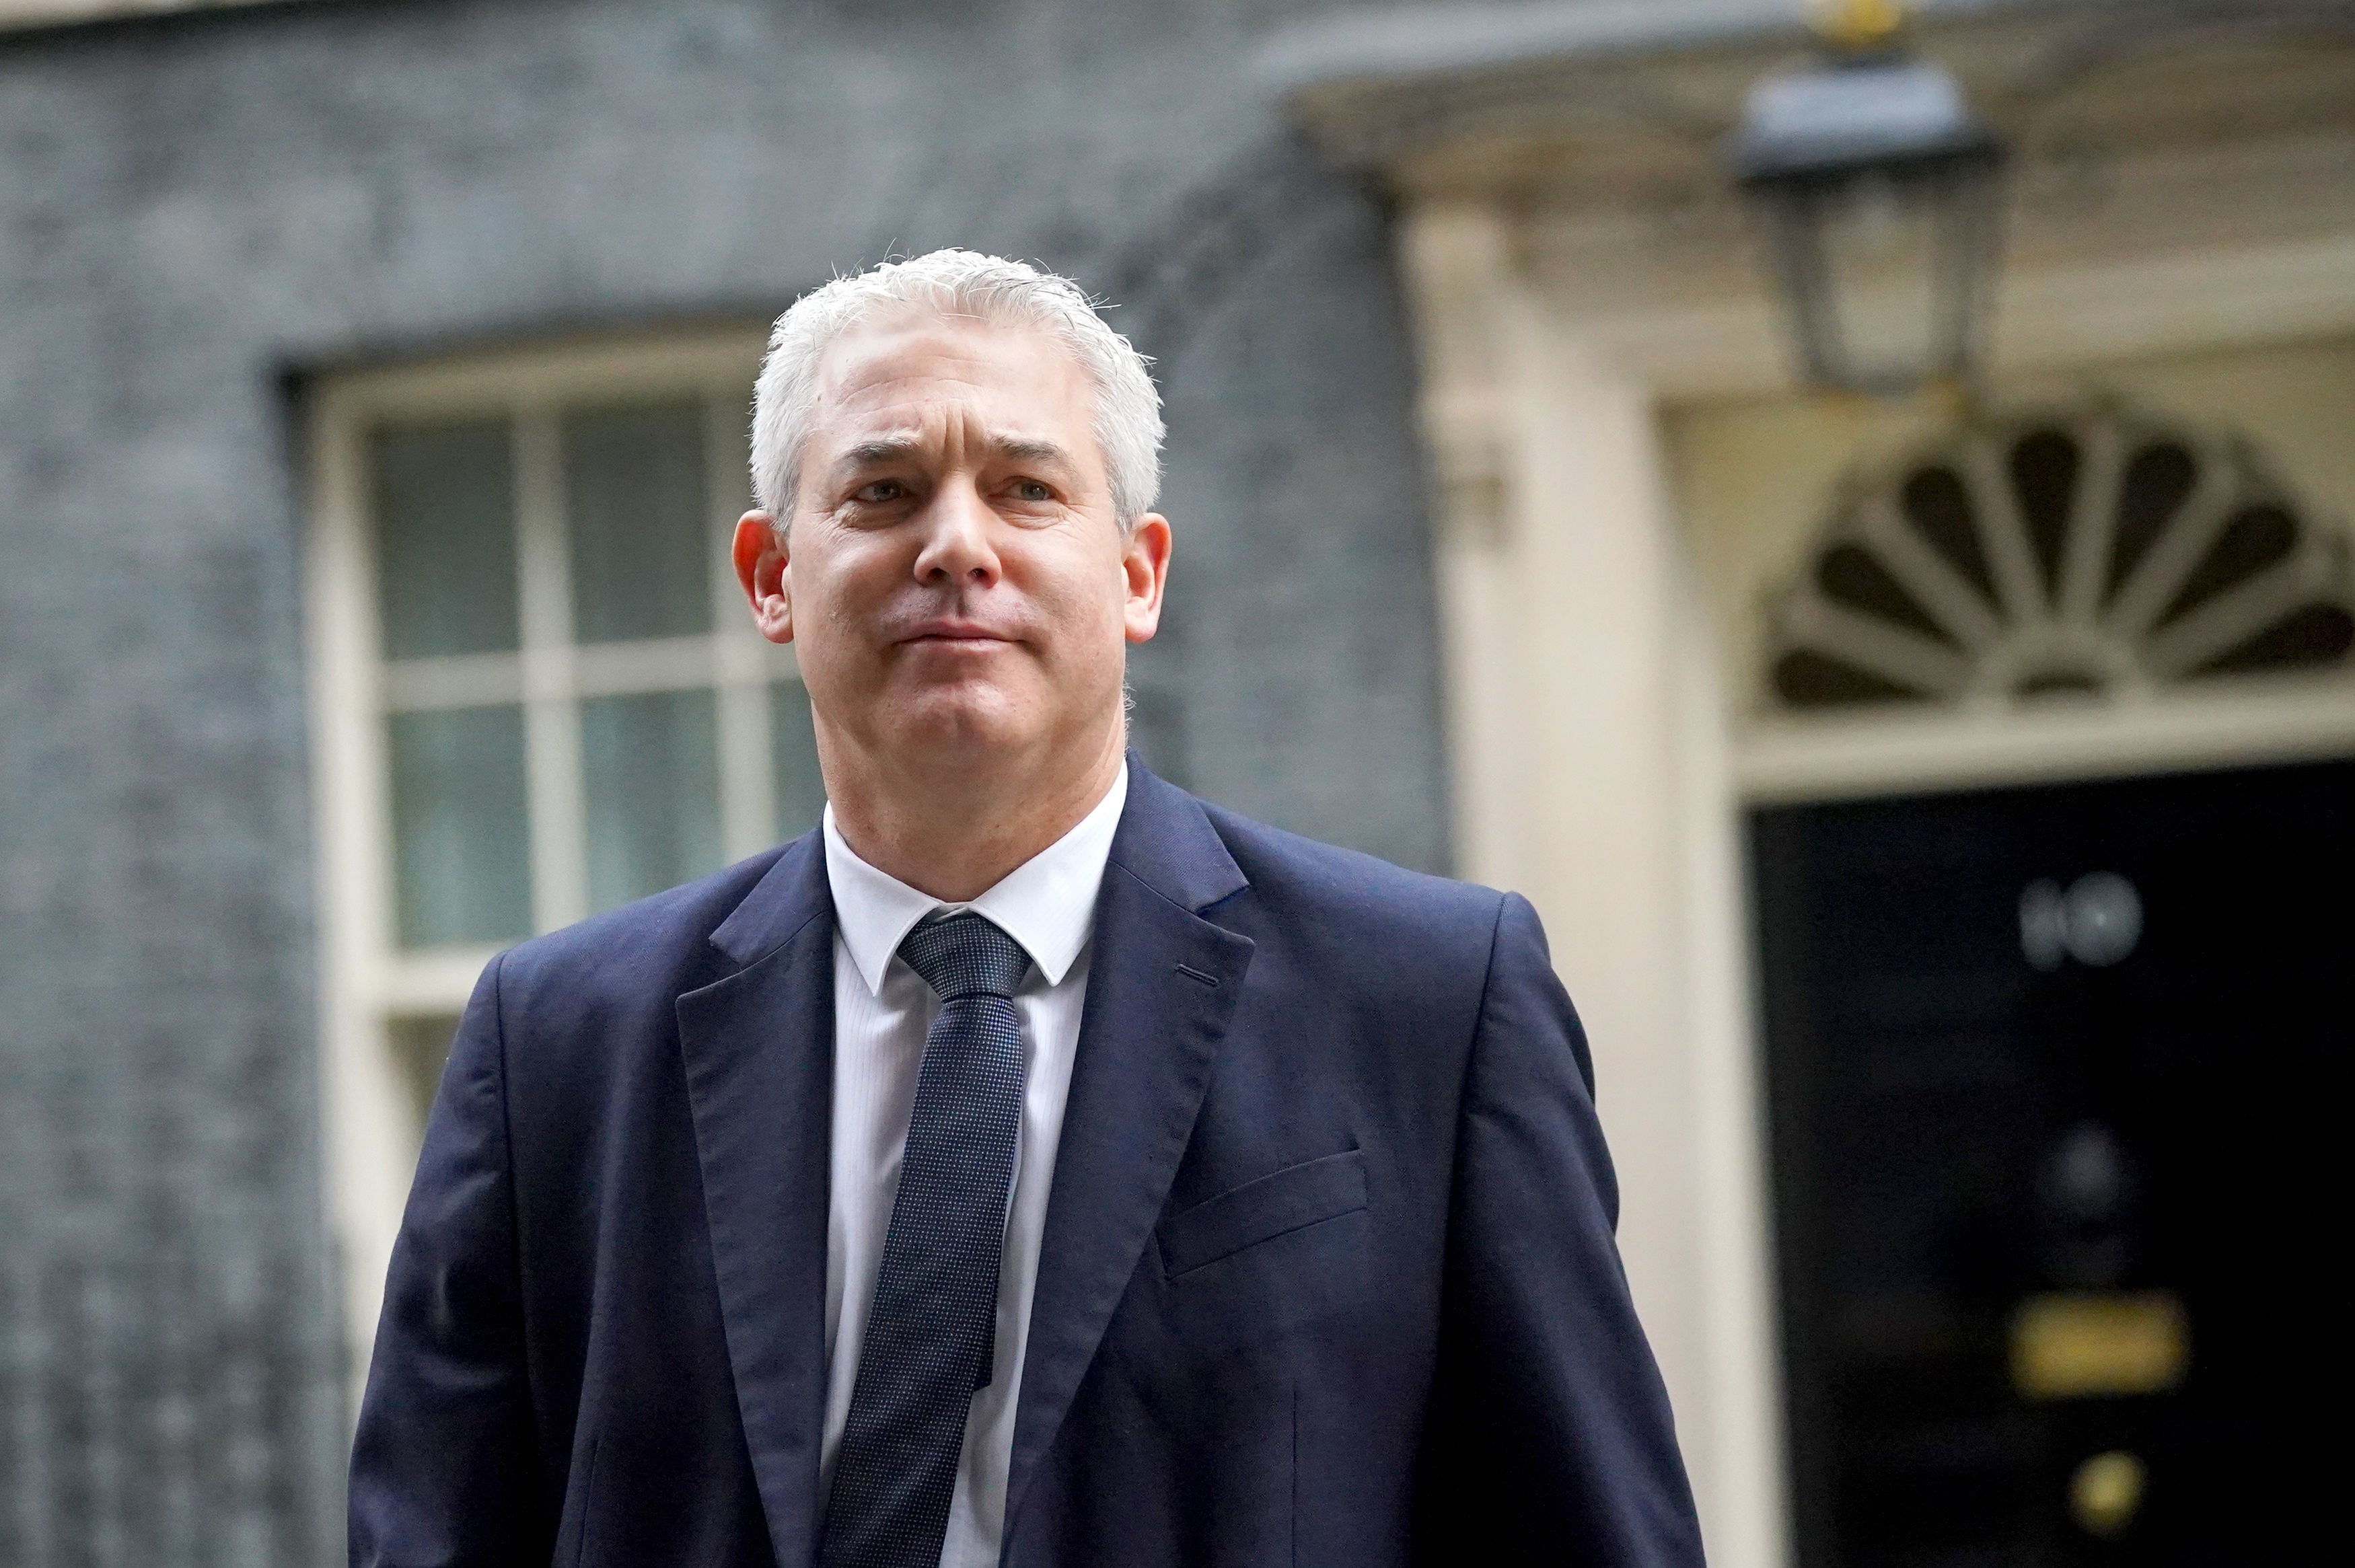 Environment secretary Steve Barclay has defended the business minister